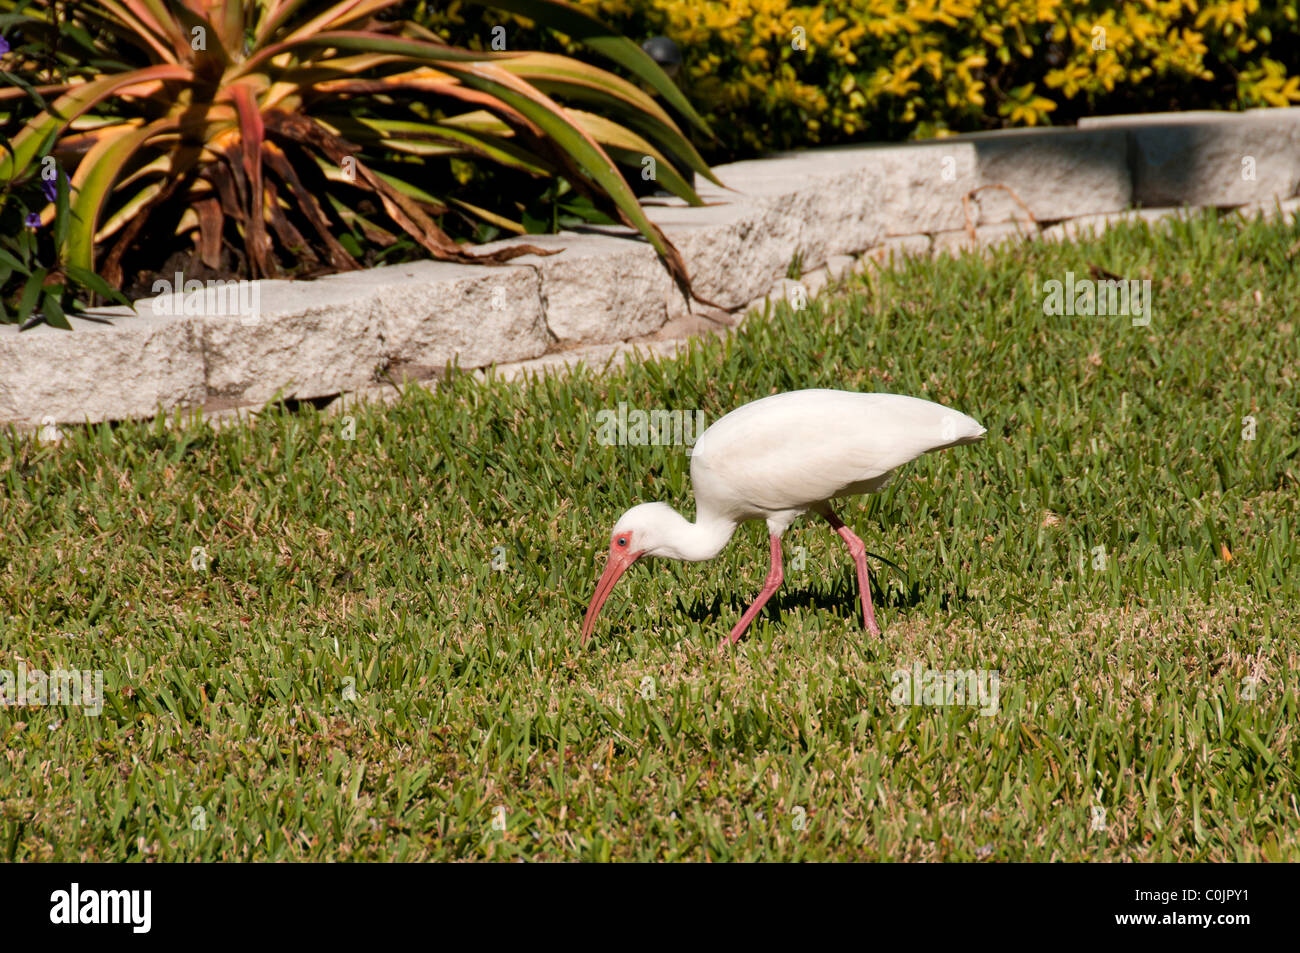 Ibis scavenging in lawn. Stock Photo